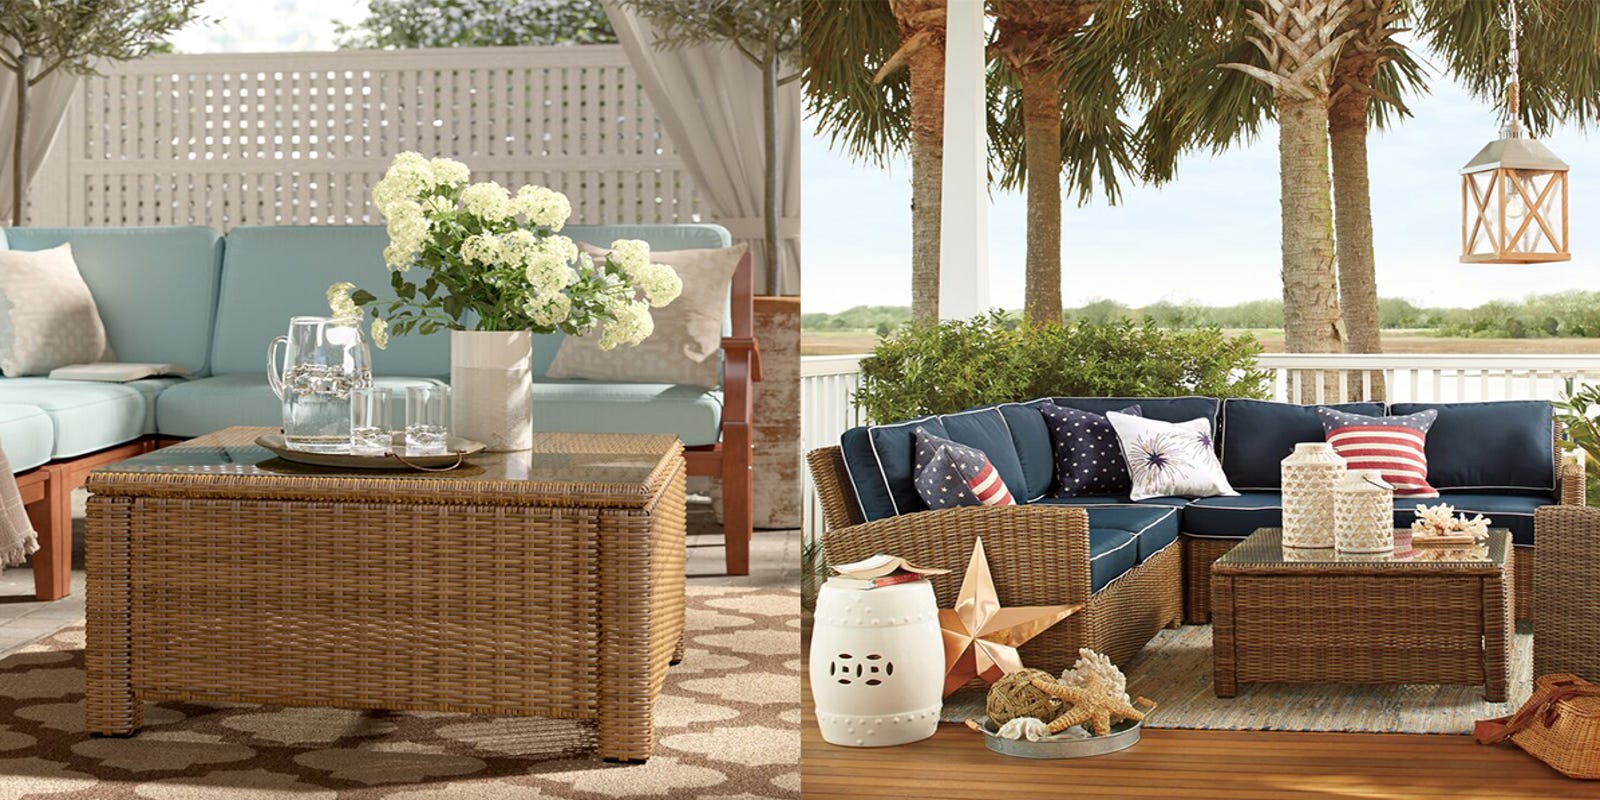 Patio furniture sale: Check out the best deals on outdoor furniture at